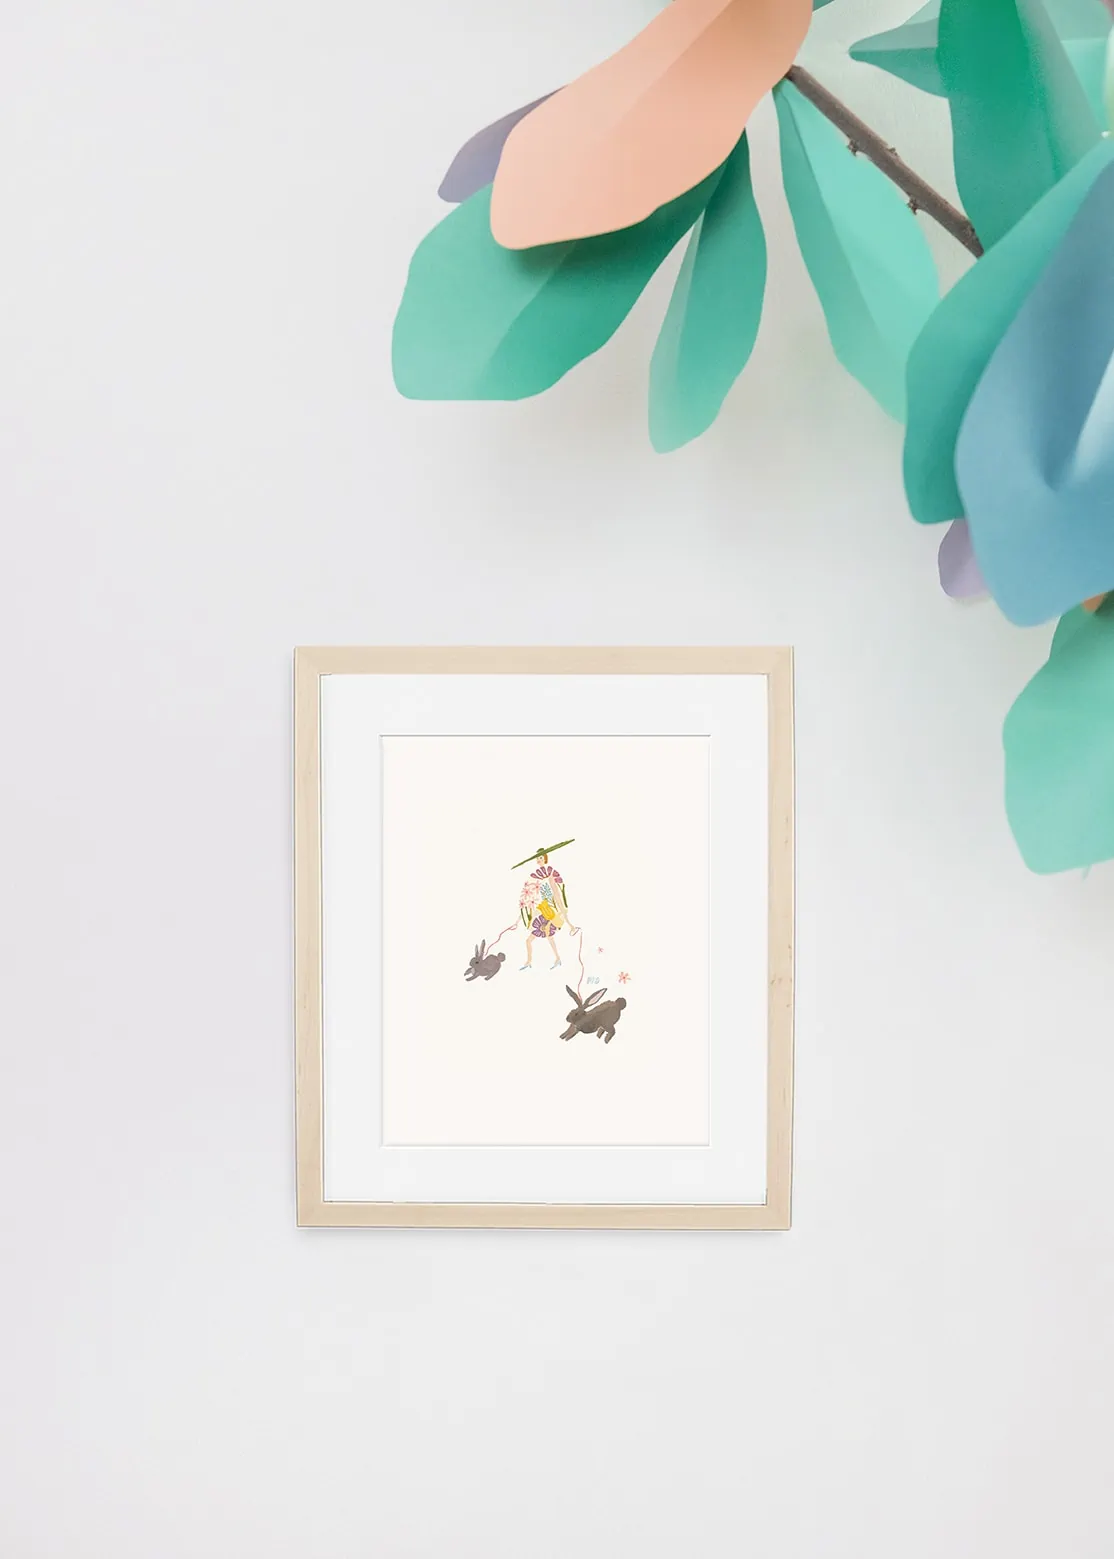 Art print of Easter Egg Lady by Monica Dorazewski on a white background with a paper tree on the side.